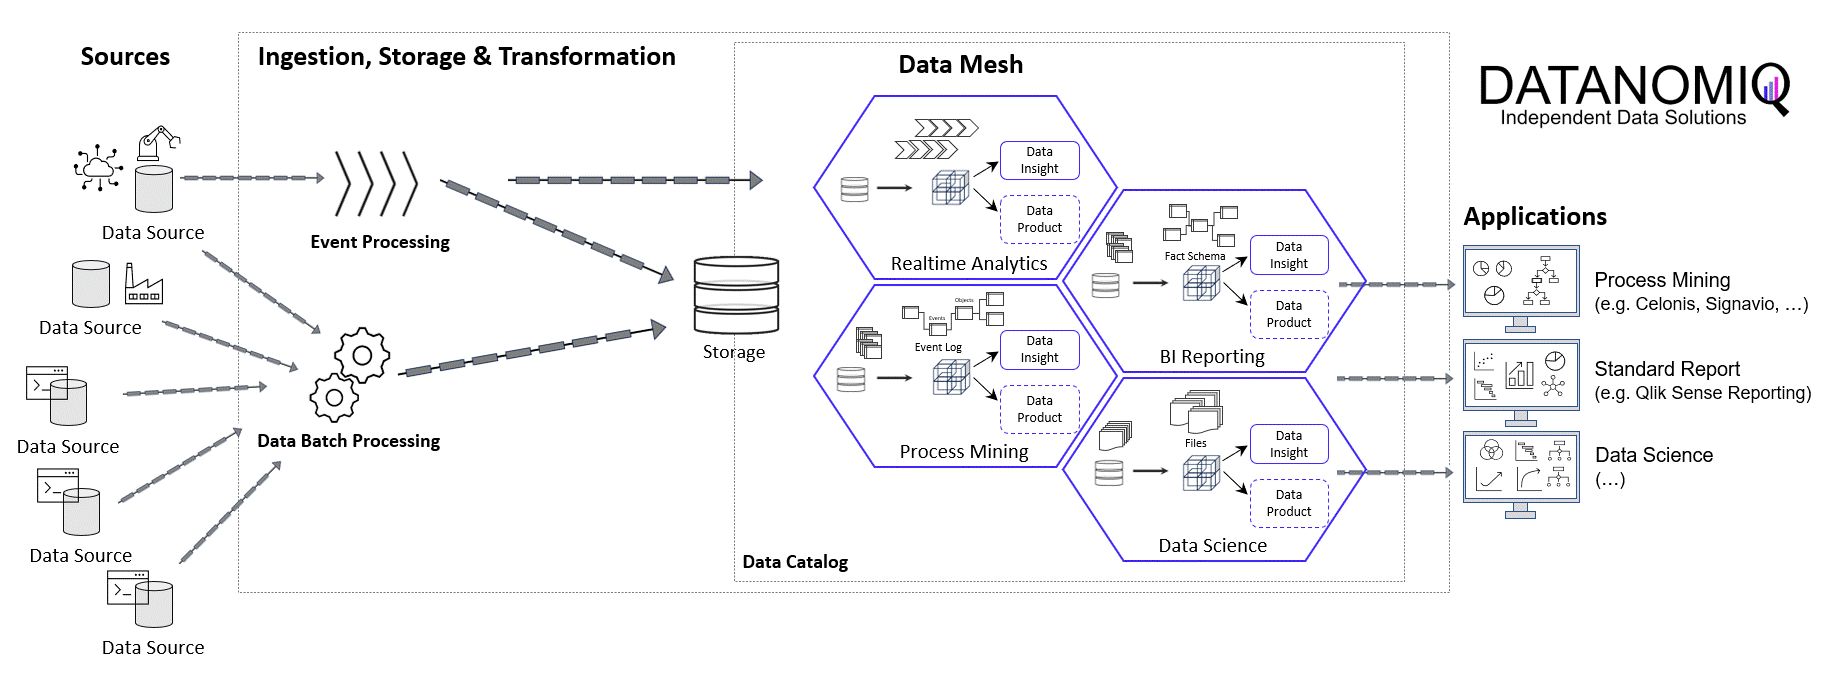 DATANOMIQ Data Mesh Cloud Architecture - This image is animated! Click to enlarge!